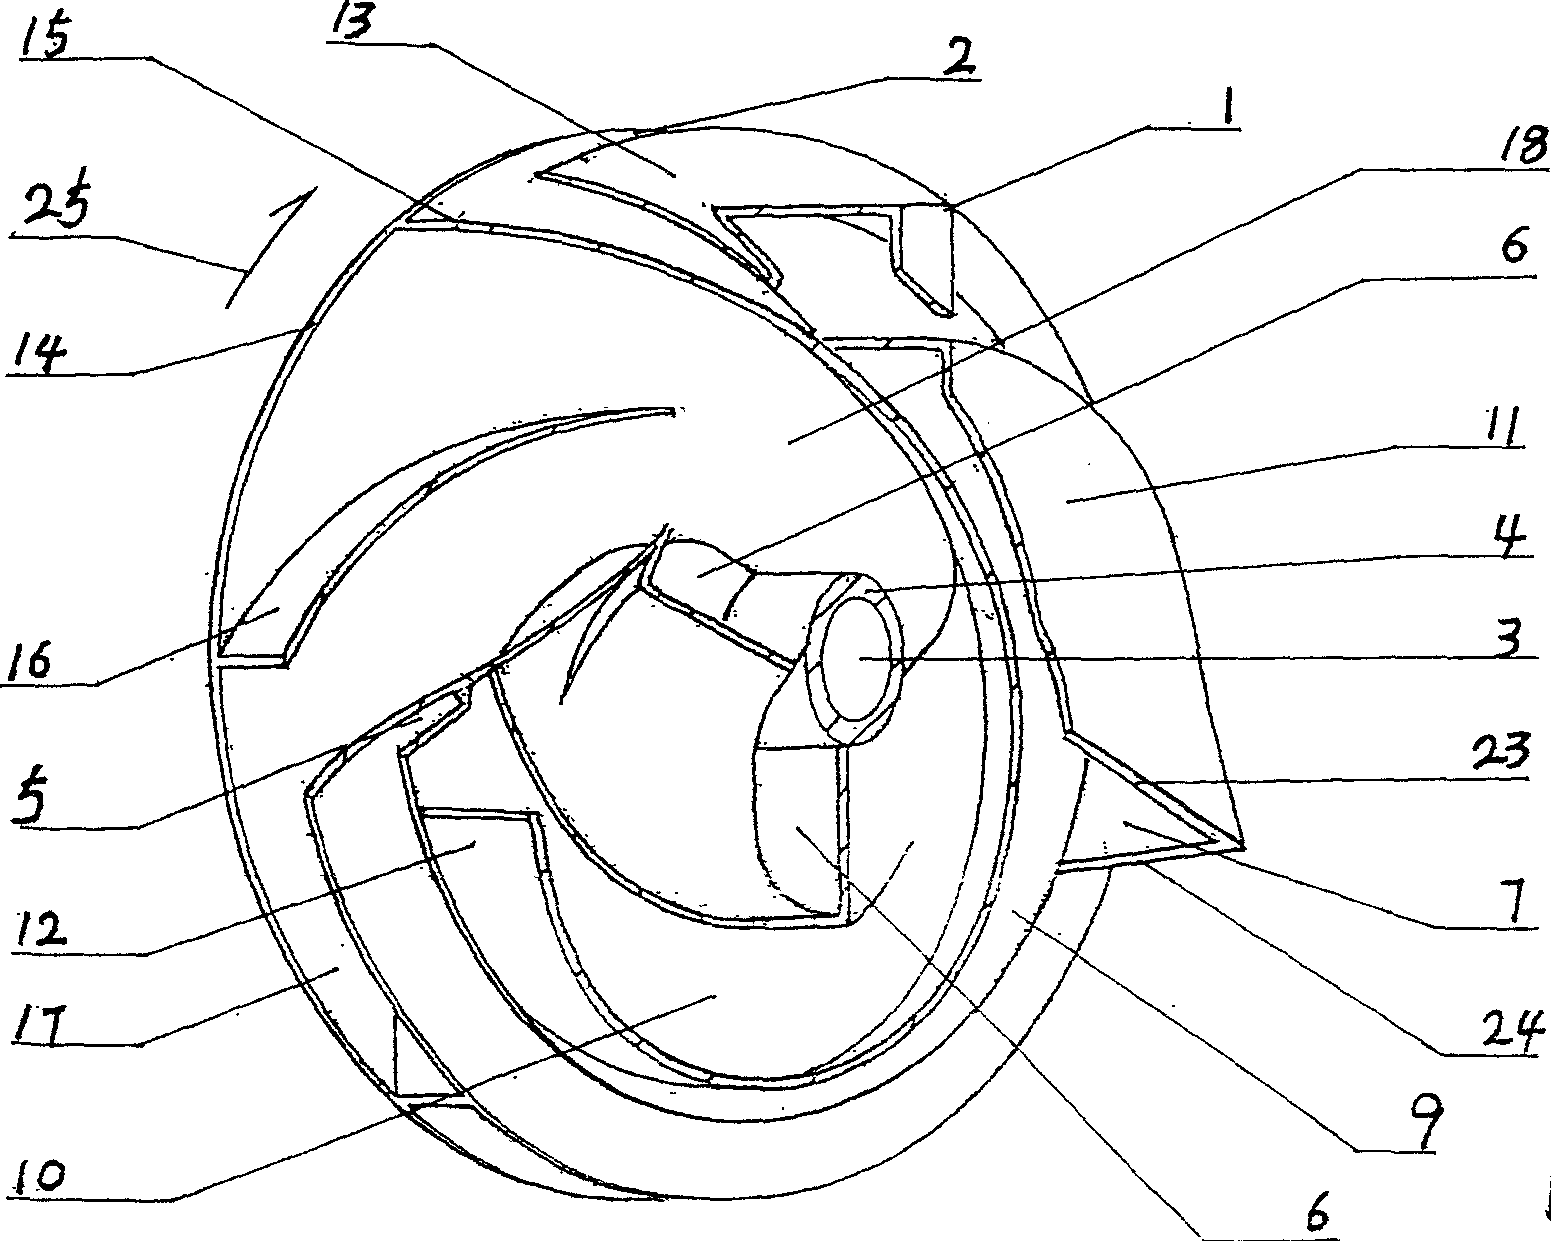 Bucket screw centrifugal vane of fan and application method of said vane in fluid delivering thereof